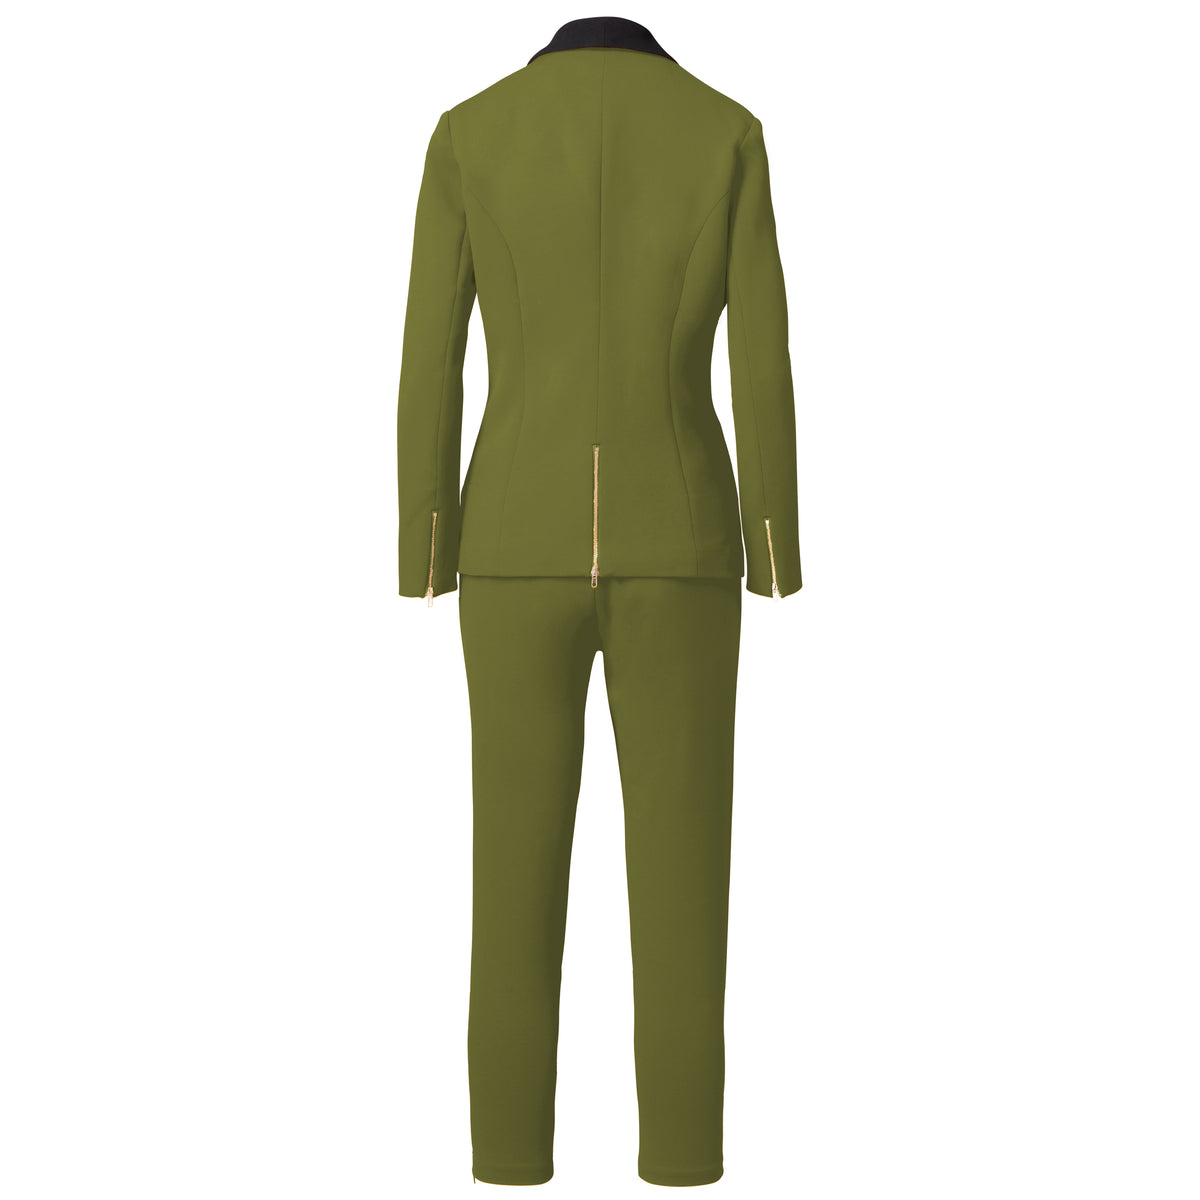 Women's Suits | A Bad Ass Olive Green Suit | Professional Clothing ...